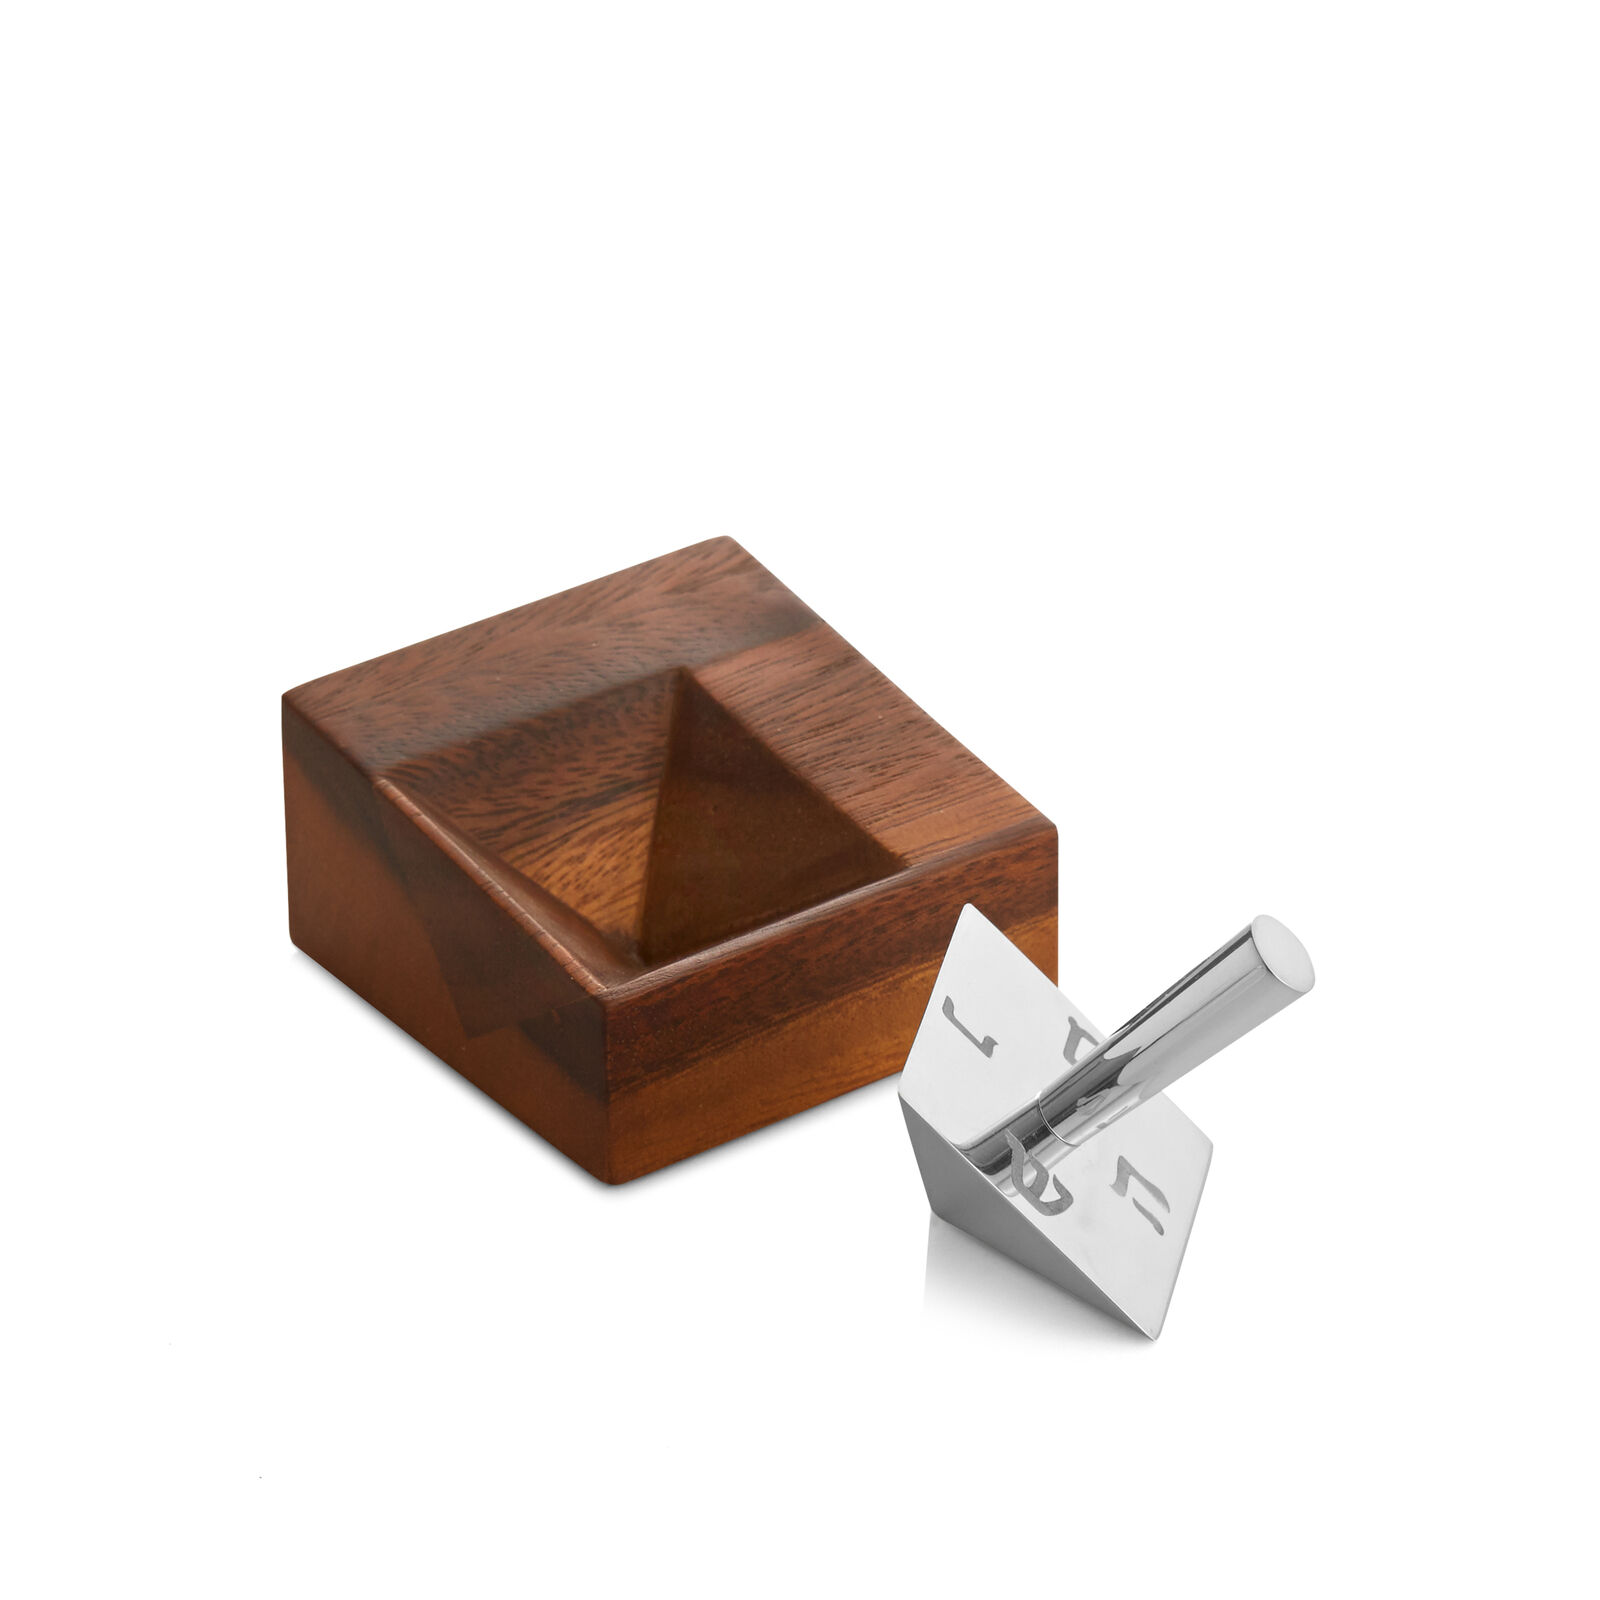 Nambe Geo Dreidel with Stand, Made of Nambe Alloy and Acacia Wood